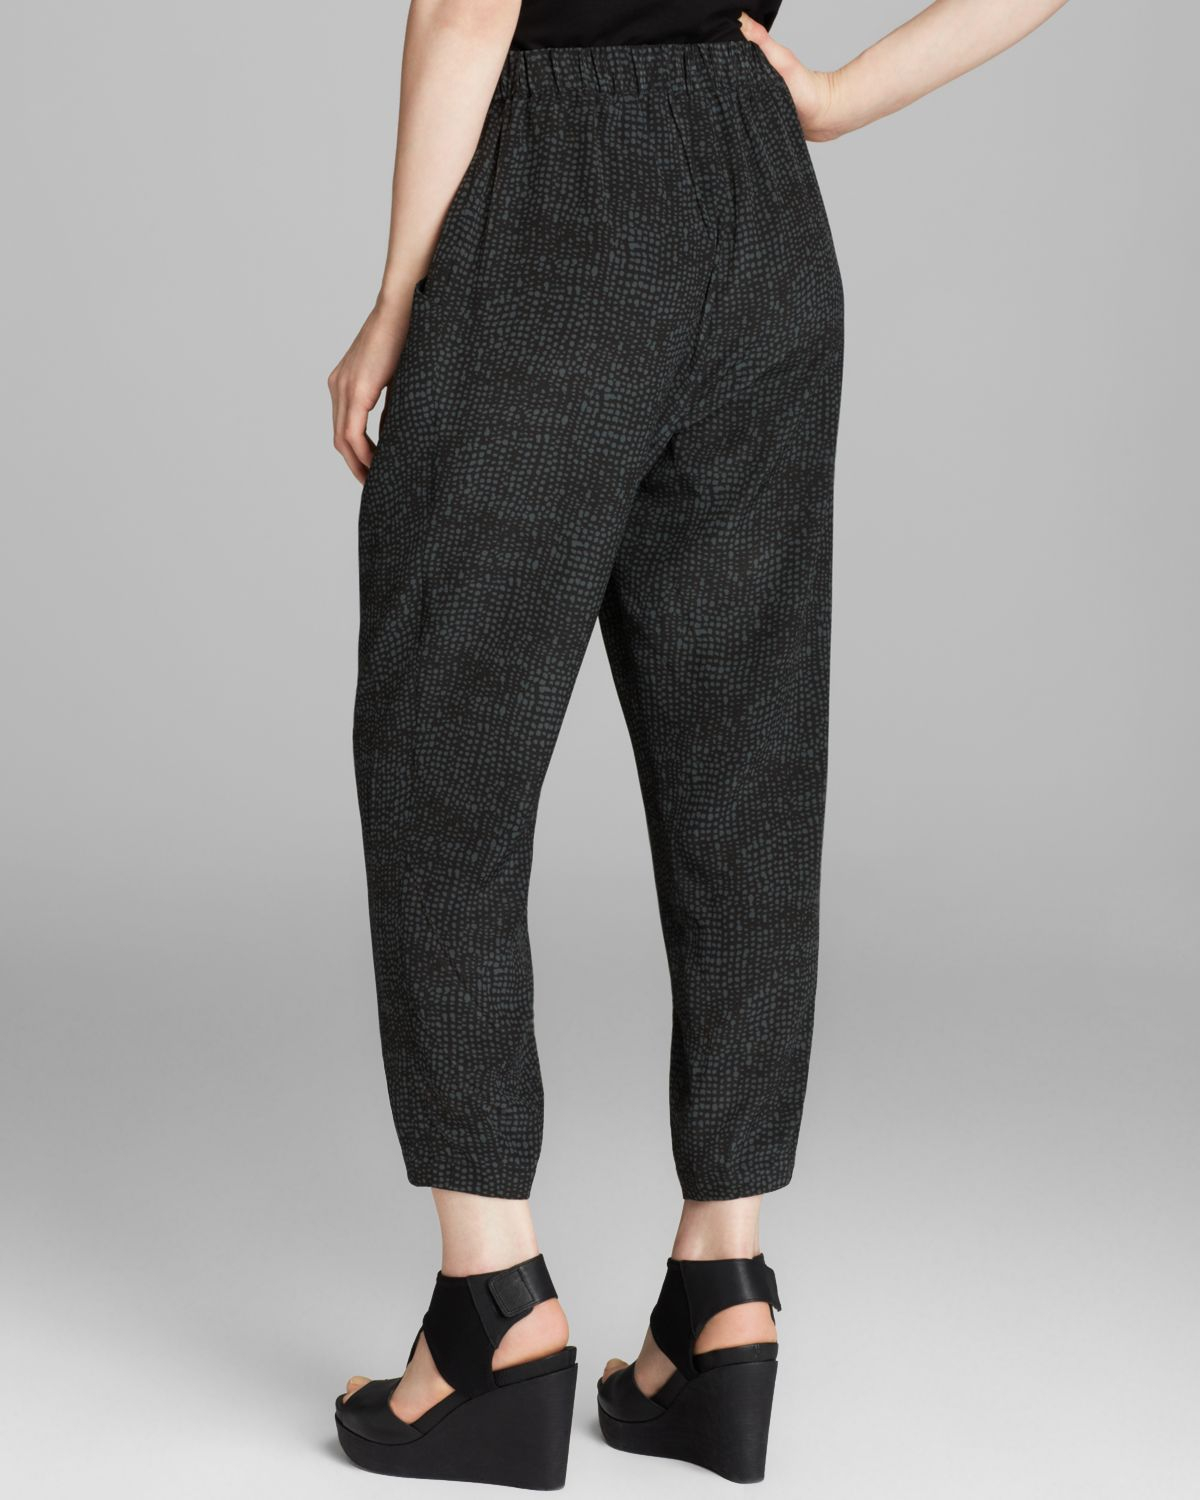 Eileen Fisher Slouchy Ankle Pants in Graphite (Black) - Lyst